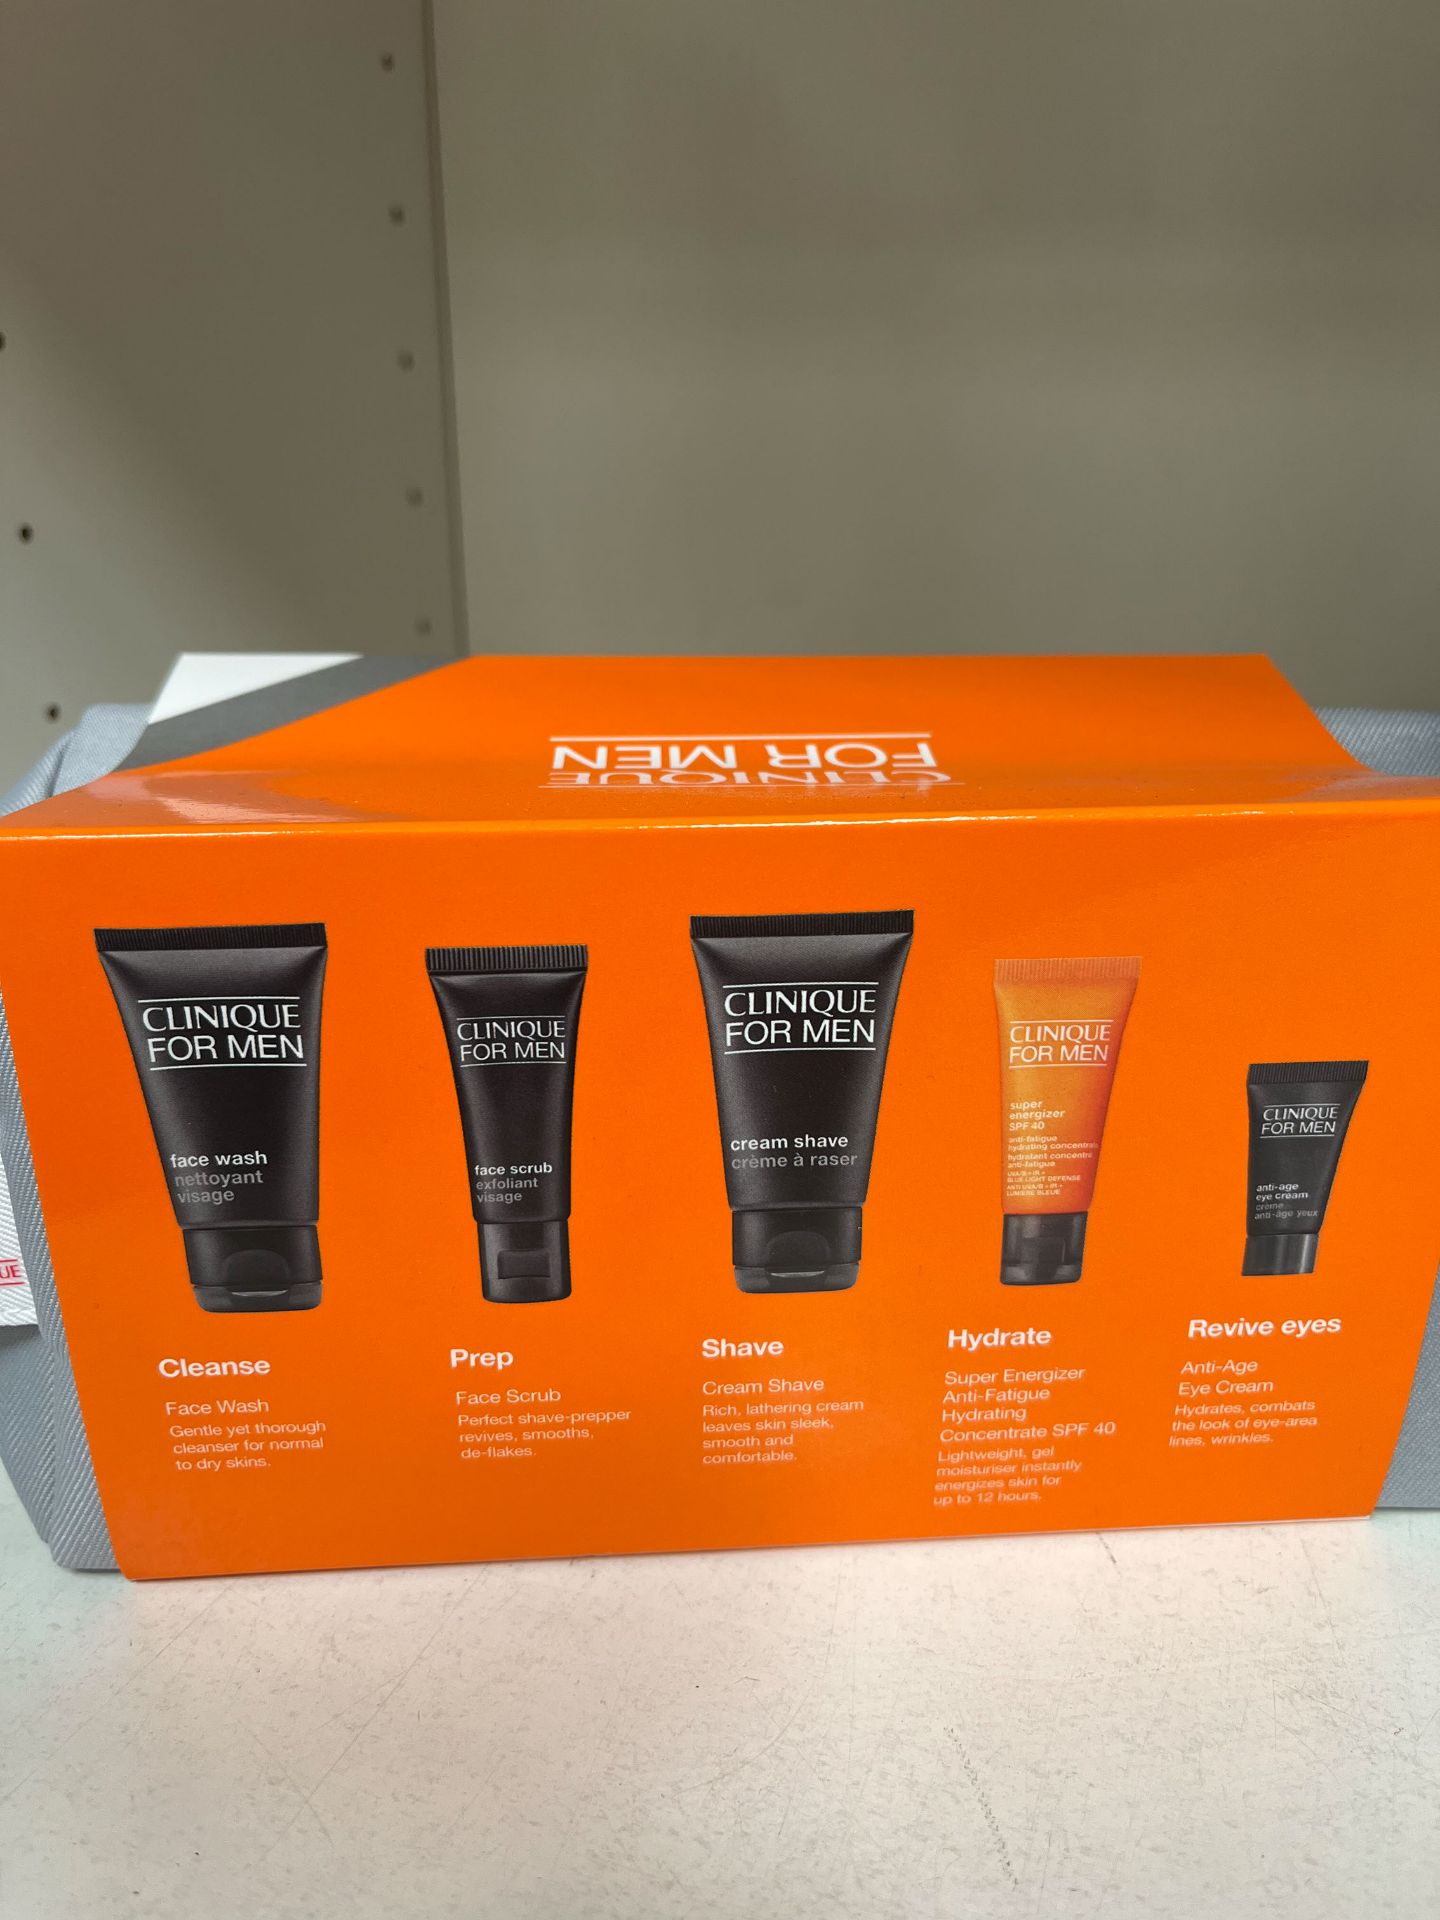 2x Clinique for Men Gift Sets - Image 3 of 4